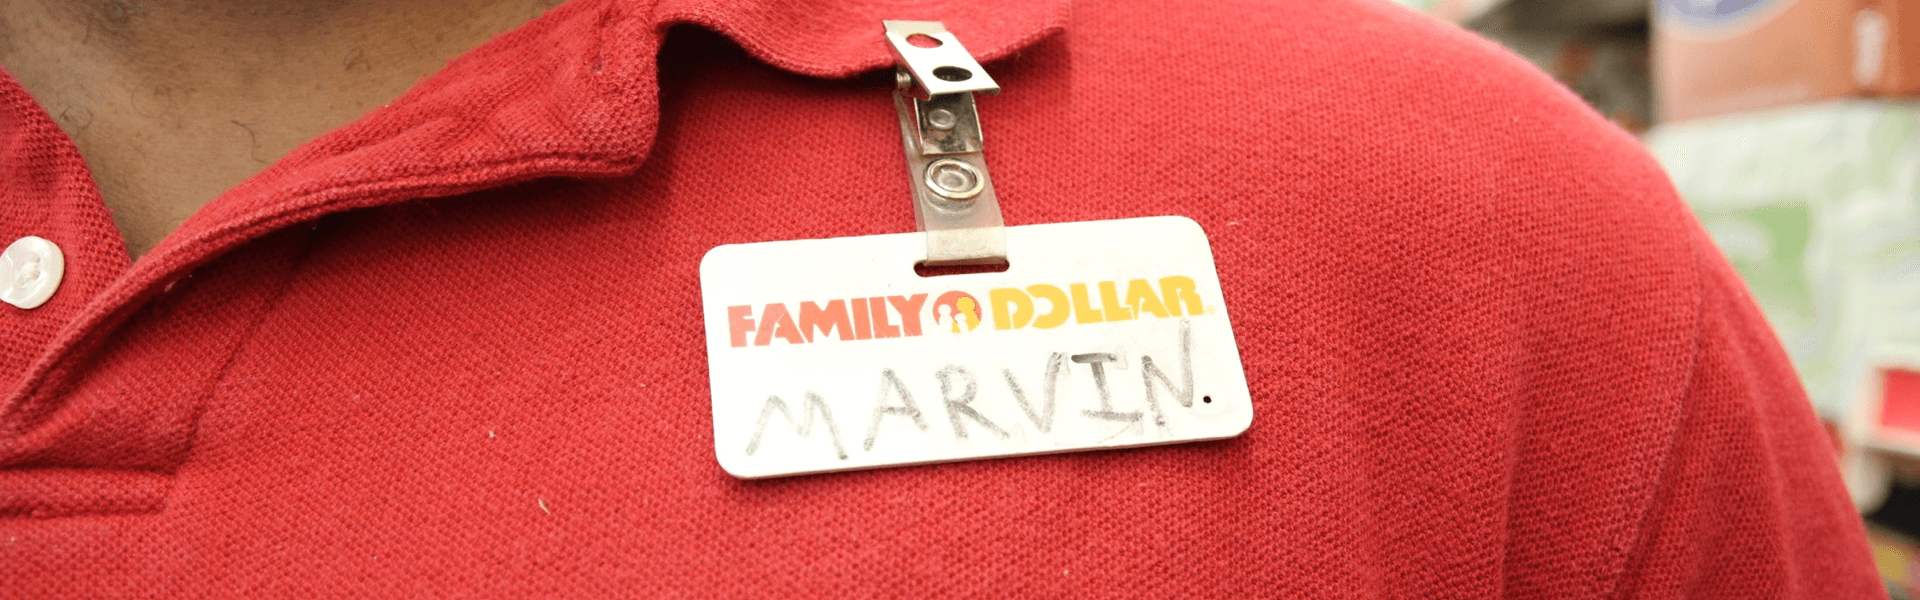 Close up photo to a red polo shirt and employee "Family Dollar" badge that reads "Marvin"